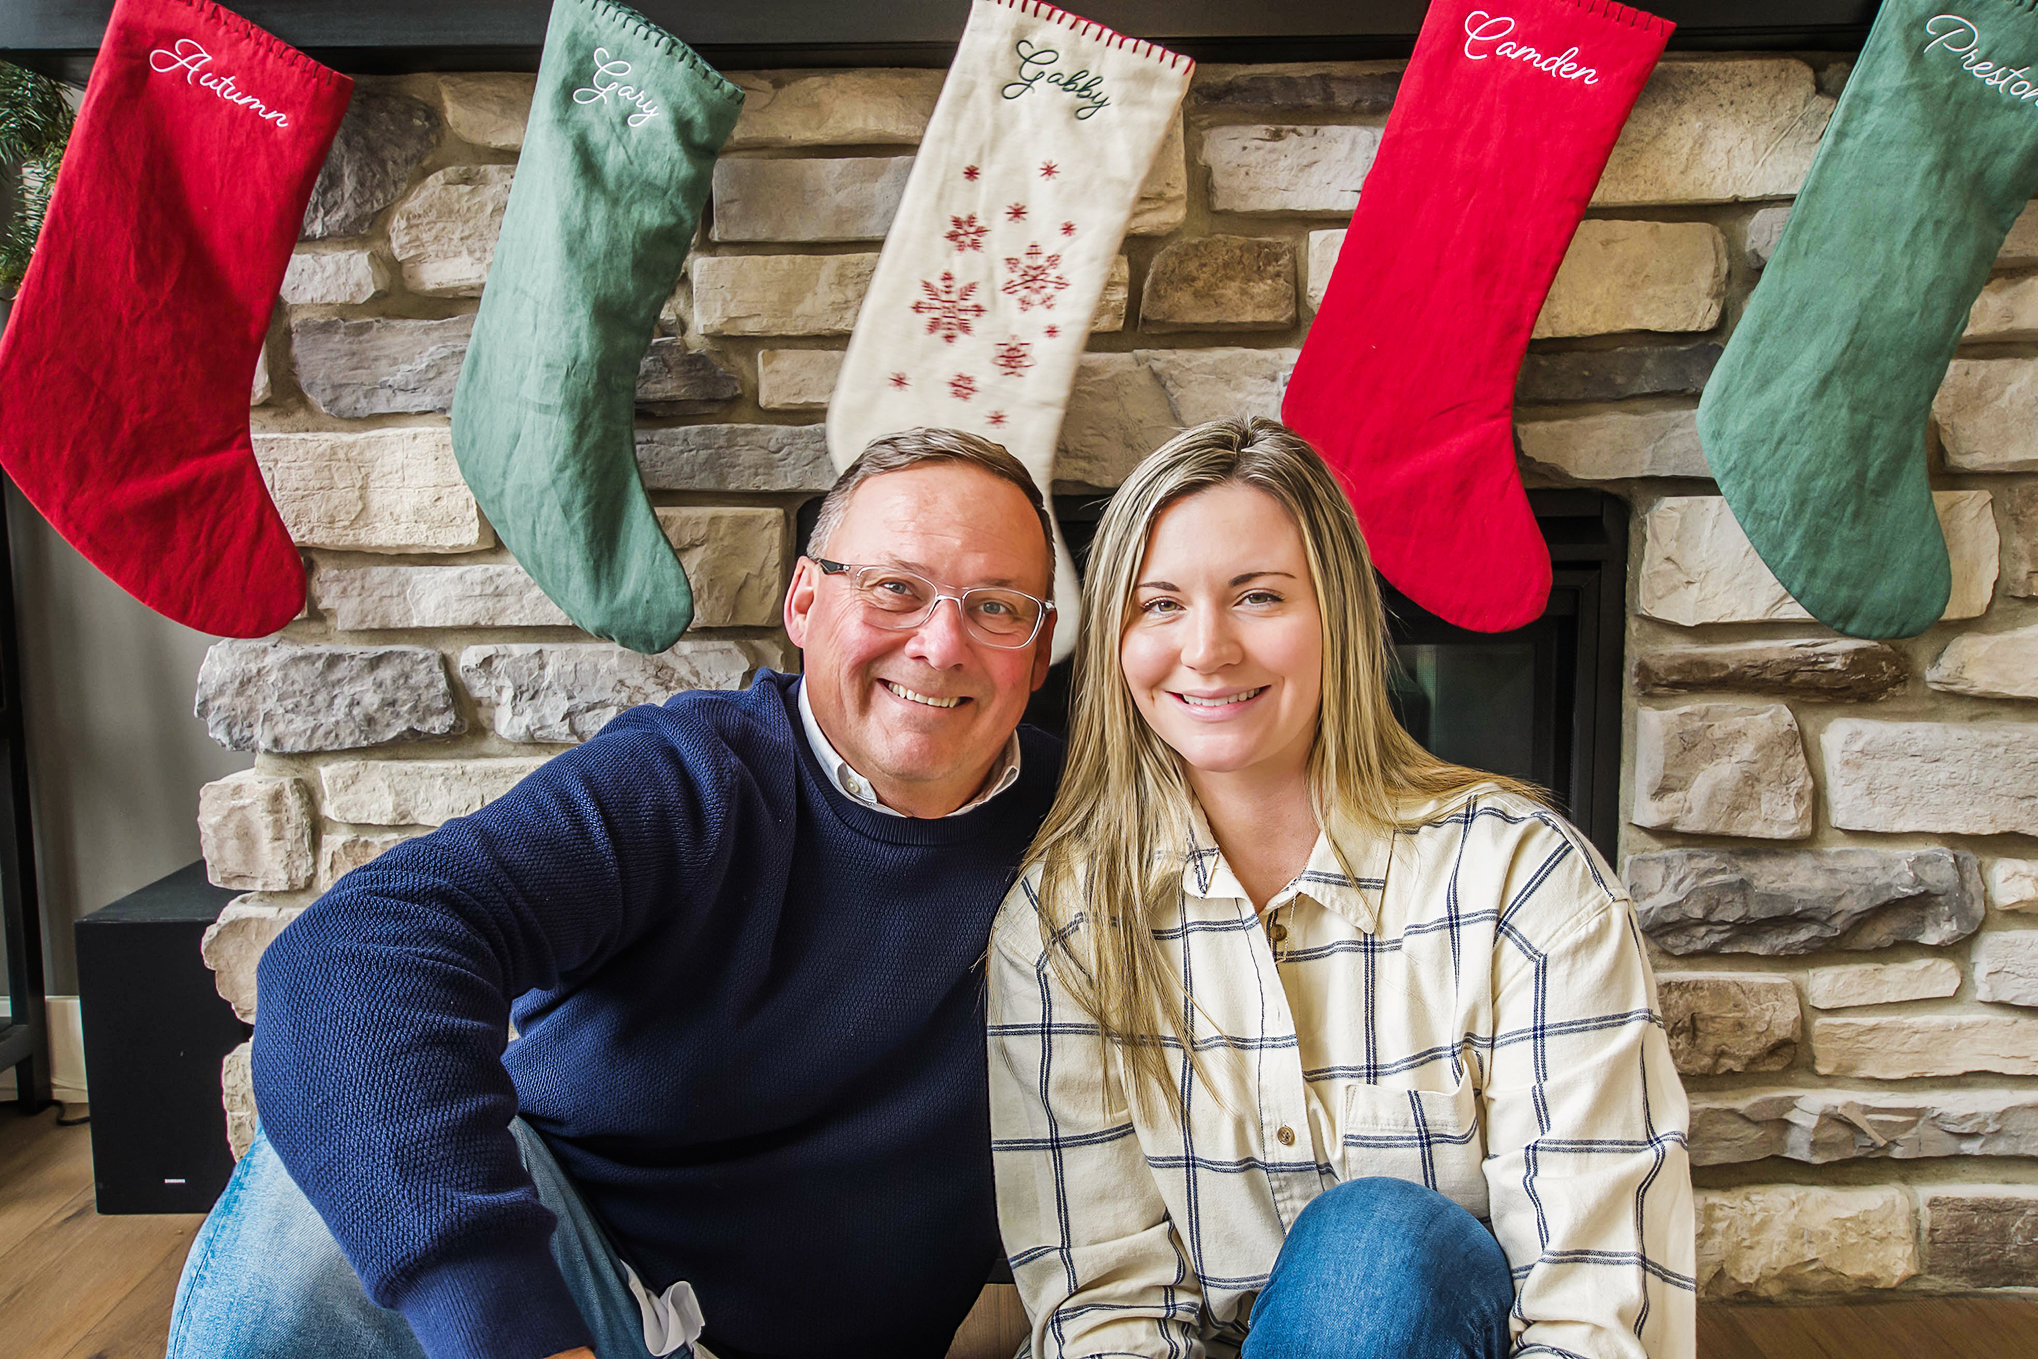 Holiday Homeowner Highlight with Gary and Autumn